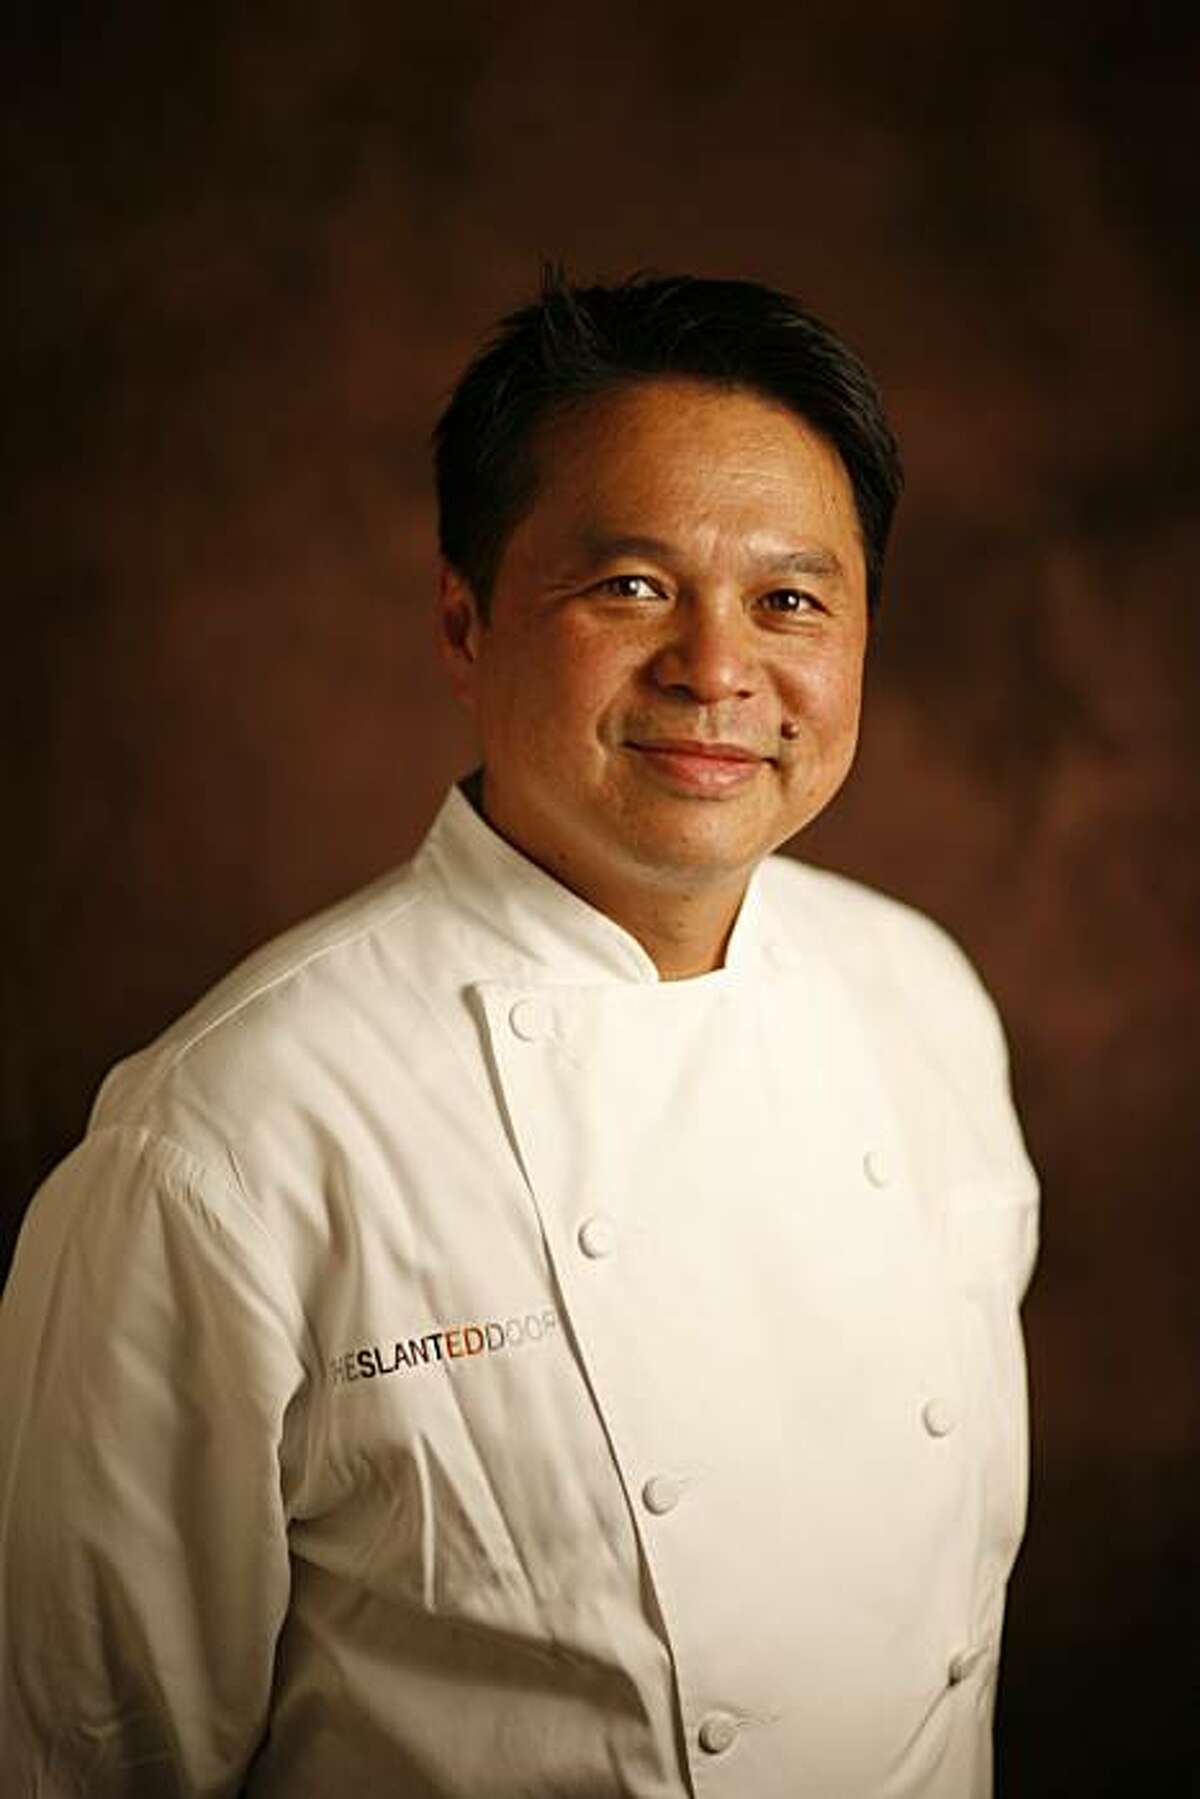 Charles Phan, chef at the Slanted Door in San Francisco, Calif. on June 19, 2008. Photo by Craig Lee / The Chronicle